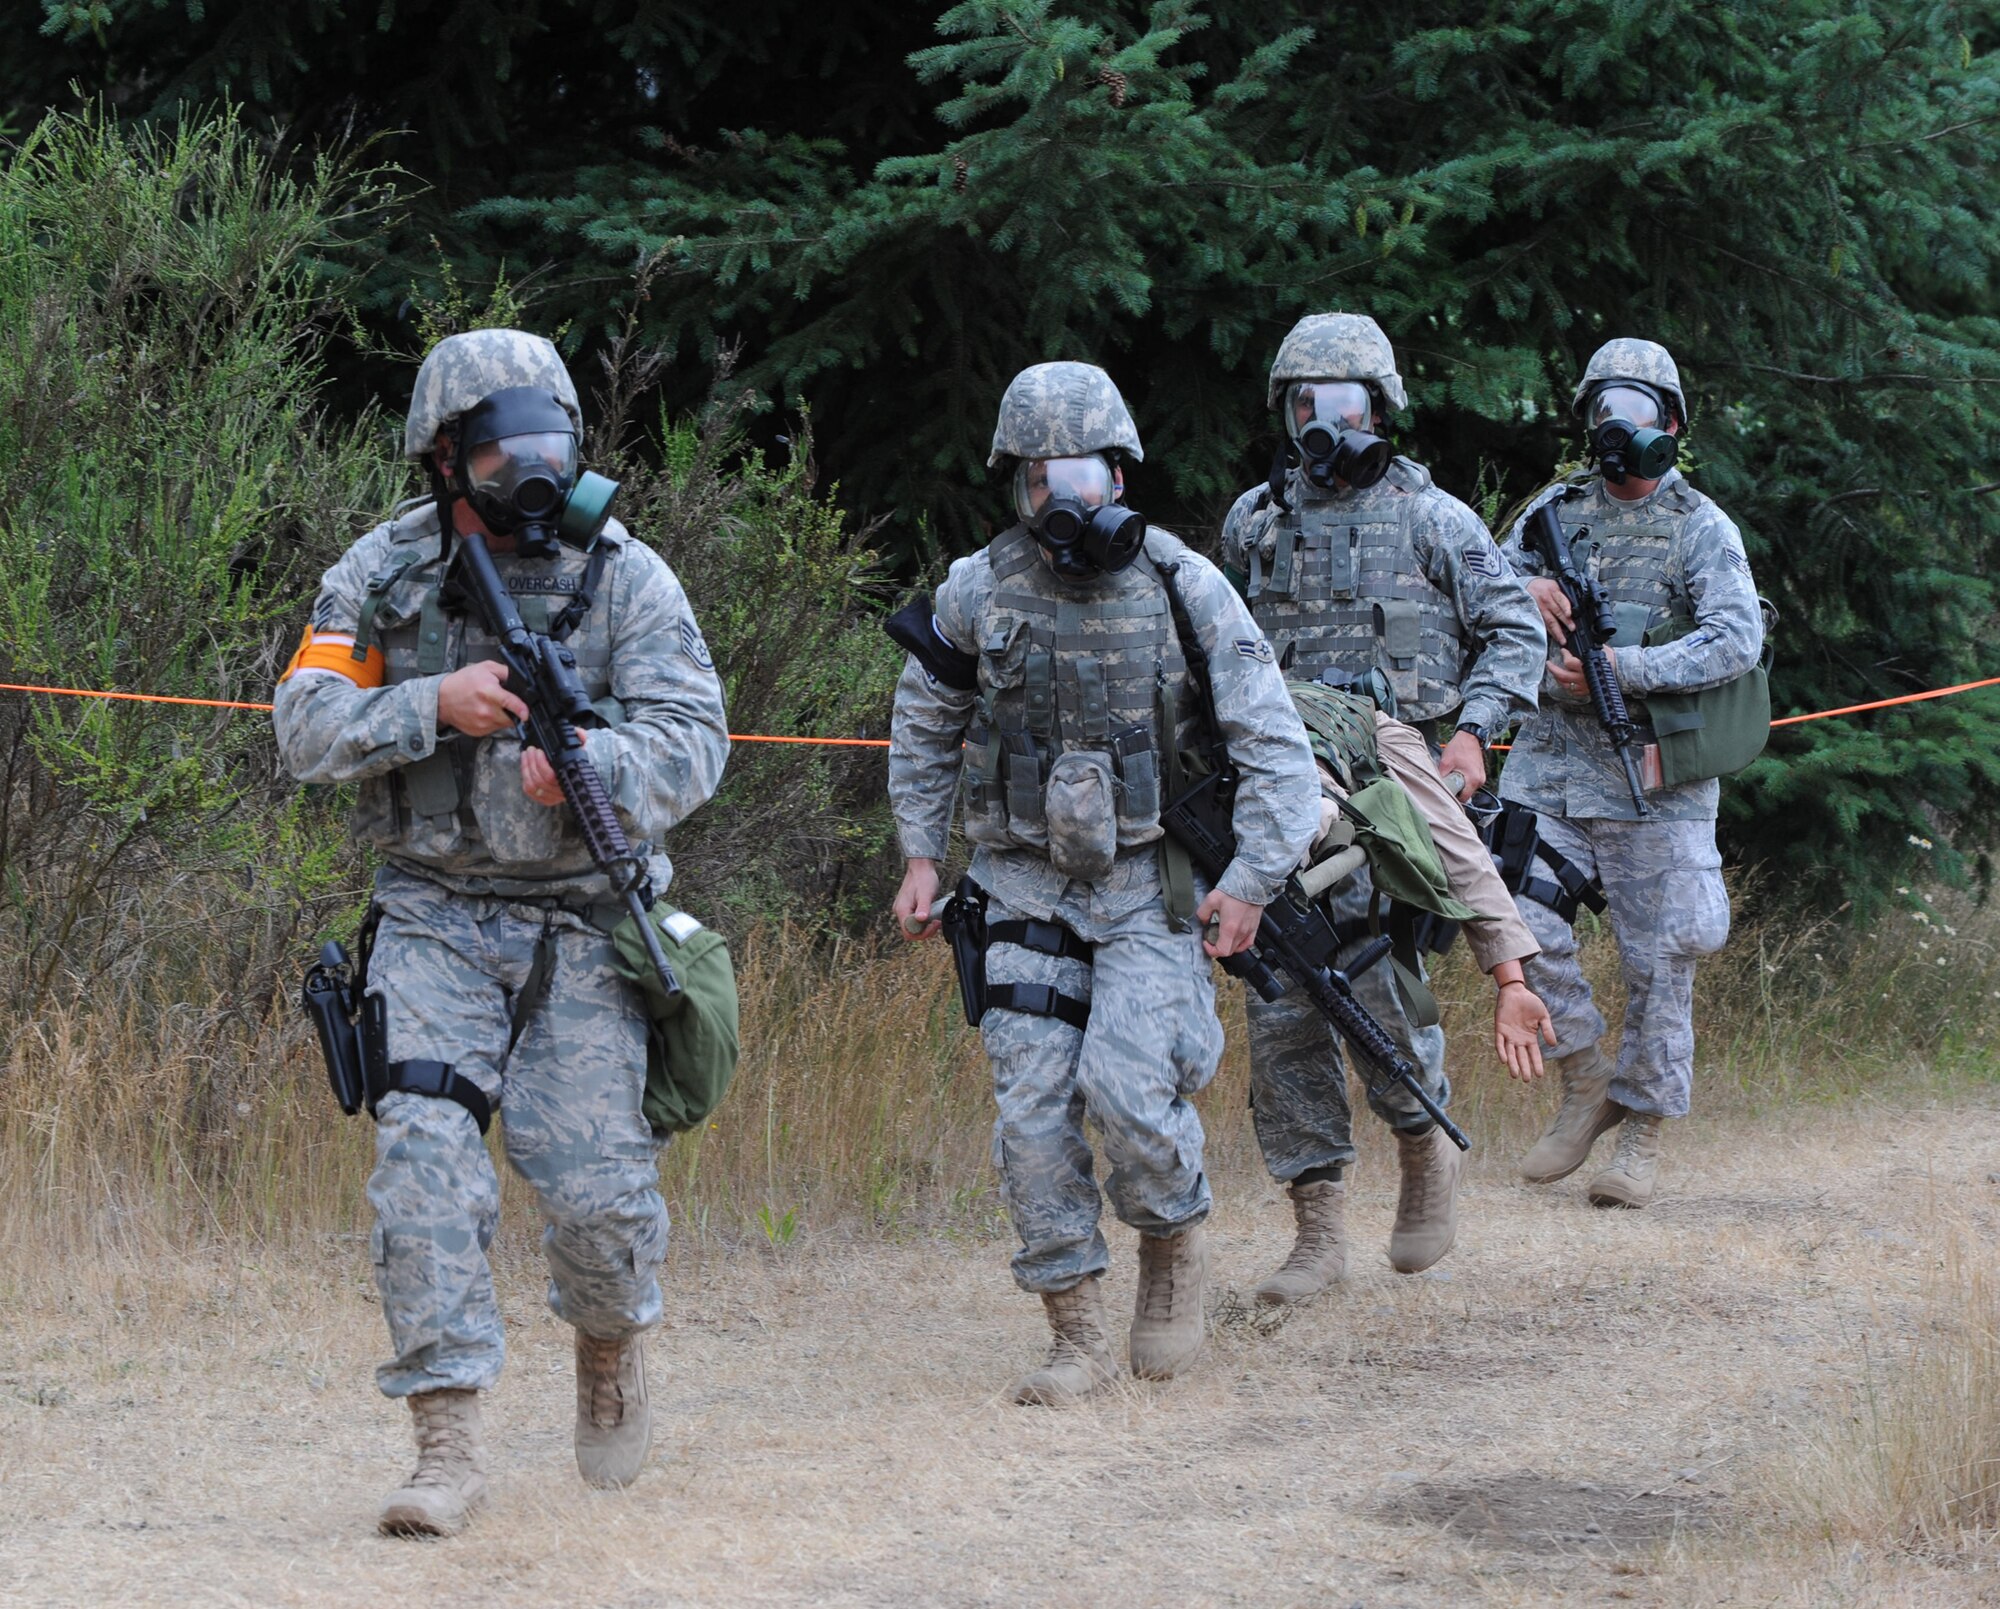 Members from Team McConnell?s RODEO security forces evacuate a simulated casualty during a combat weapons competition at McChord Air Force Base, Wash., on July 22. Senior Airman Nathan Shelley, a Reservist assigned to the 931st Air Refueling Group, was part of the security team. Reservists and active-duty Airmen represented McConnell as a total-force RODEO team for the first time. (U.S. Air Force photo/Tech. Sgt. Chyrece Campbell)